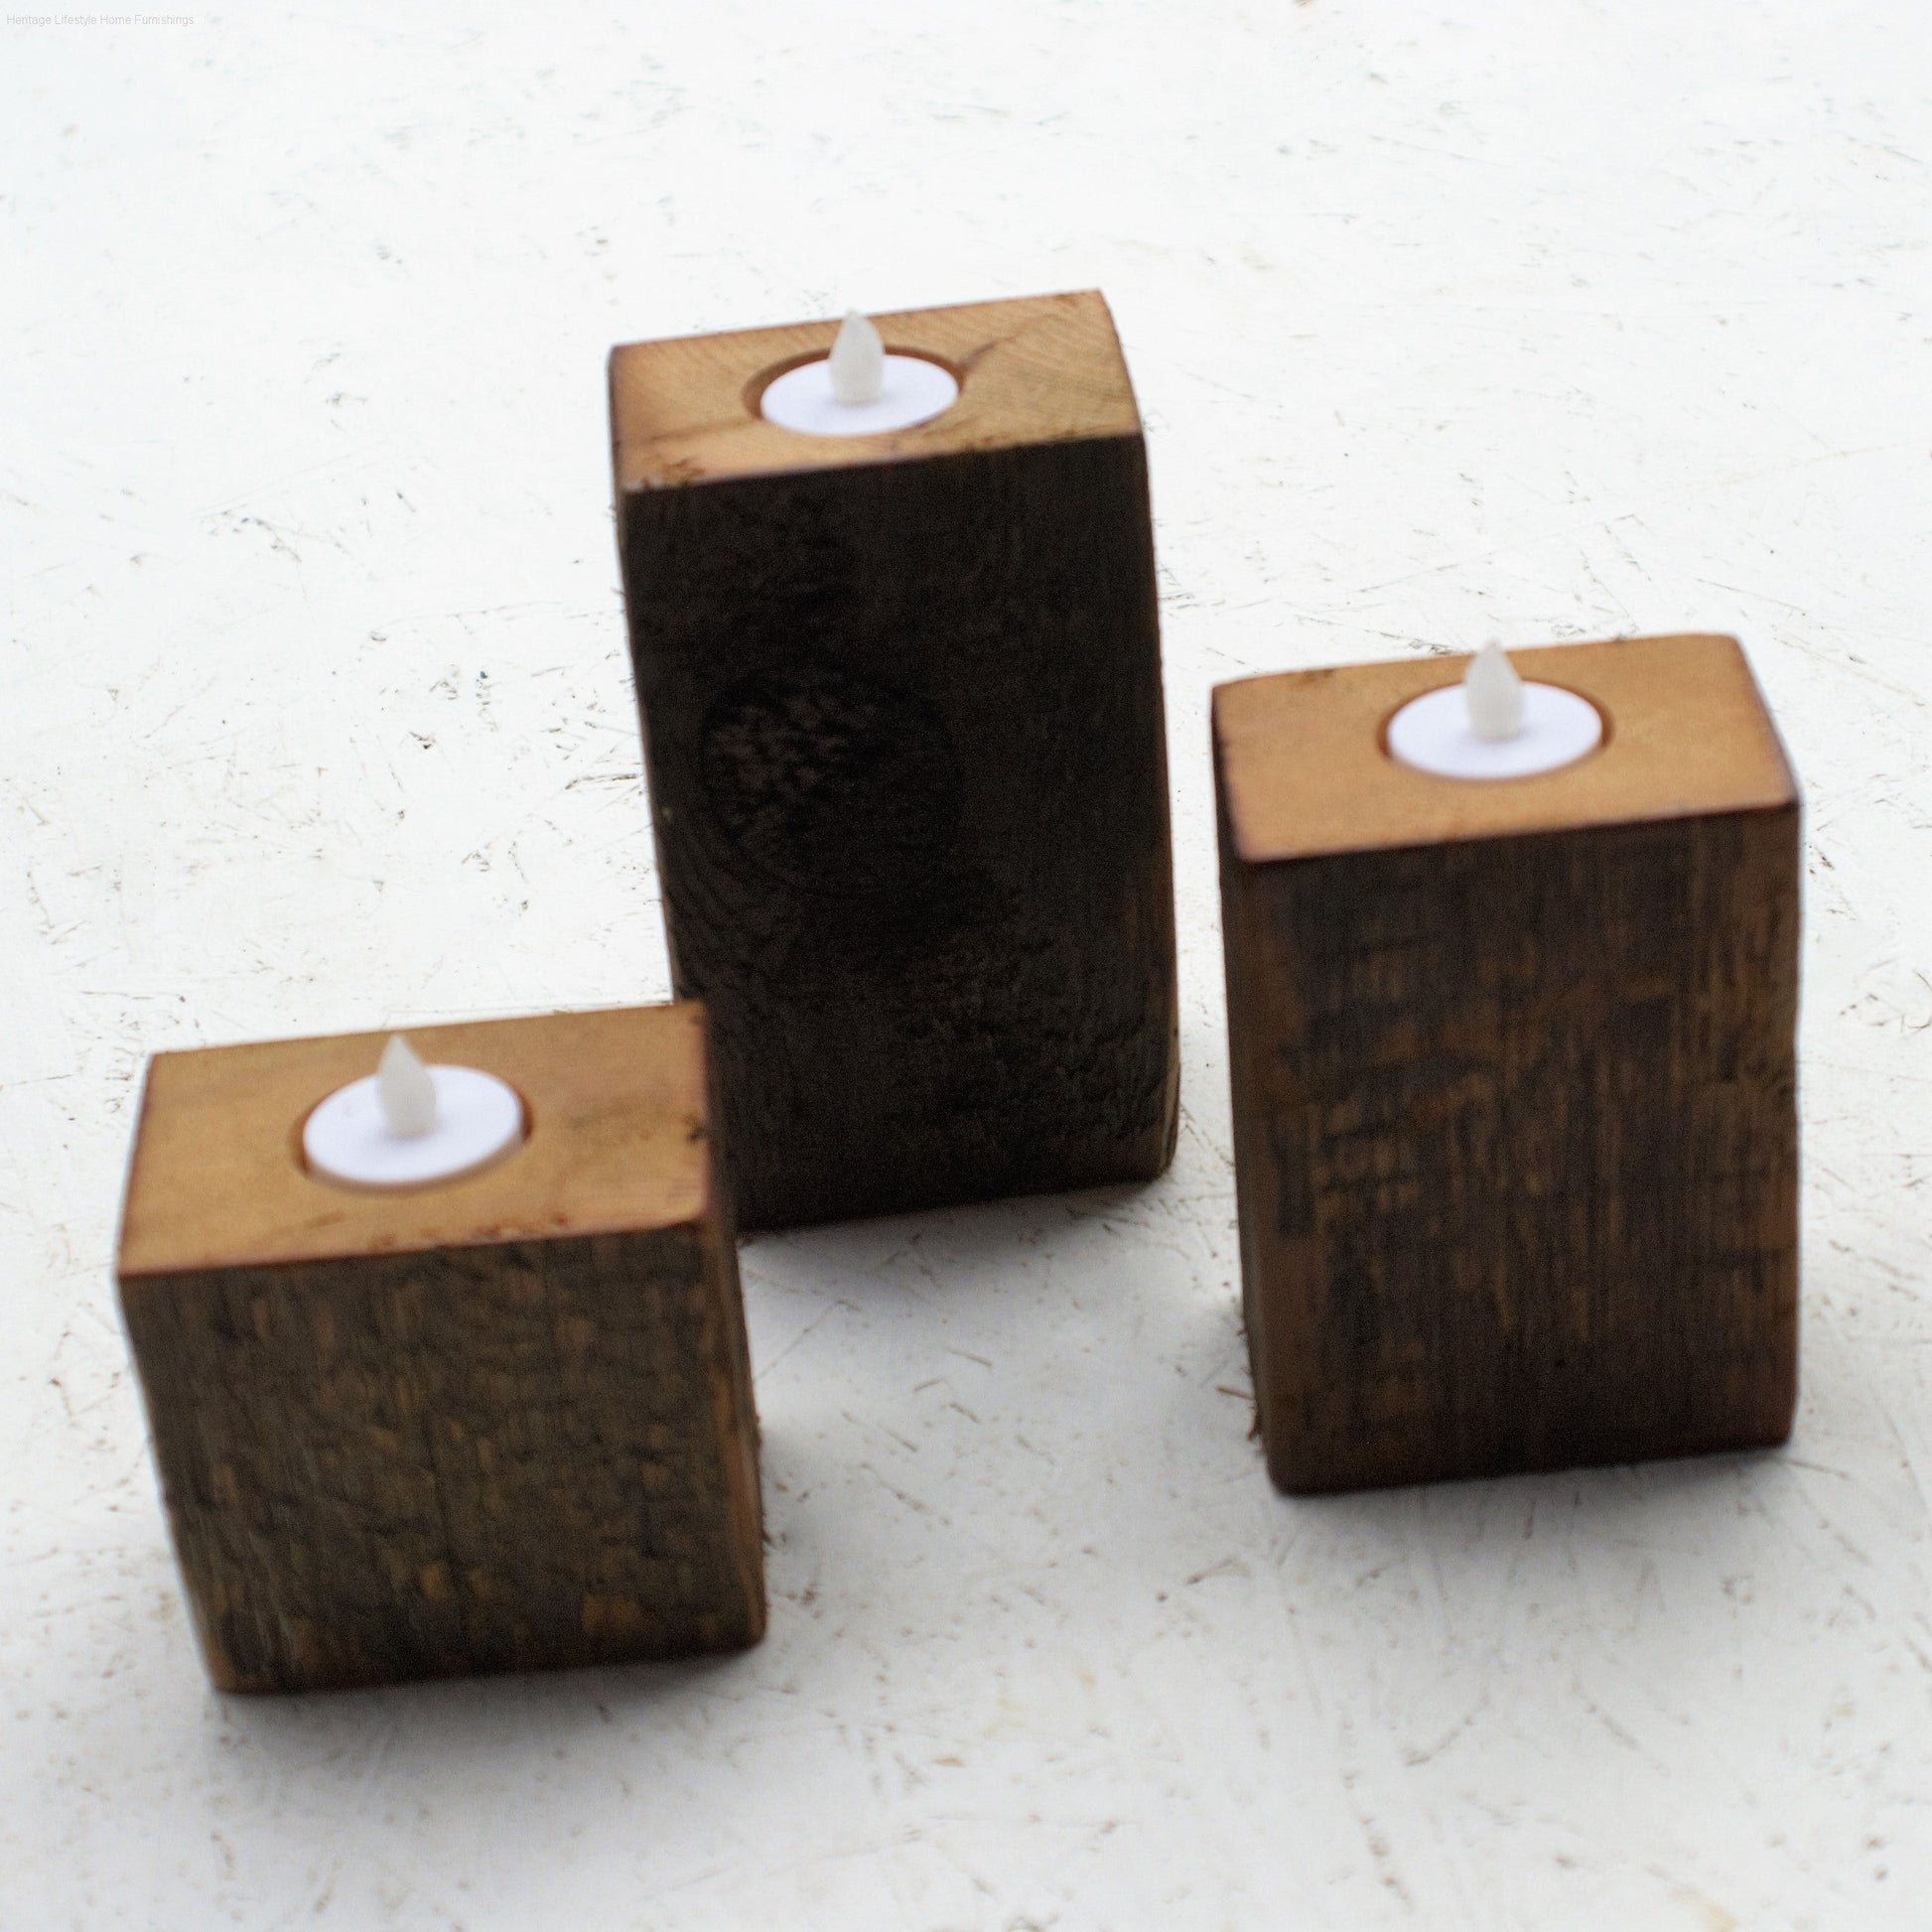 Accessories - Wood Candle Holders